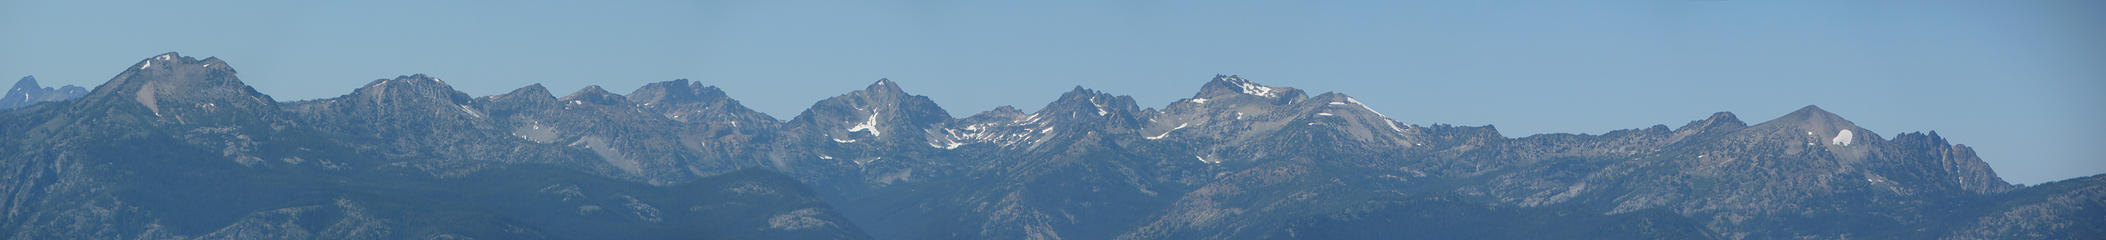 Duncan Hill to Pyramid Peak, with Pinnacle Peak in the background